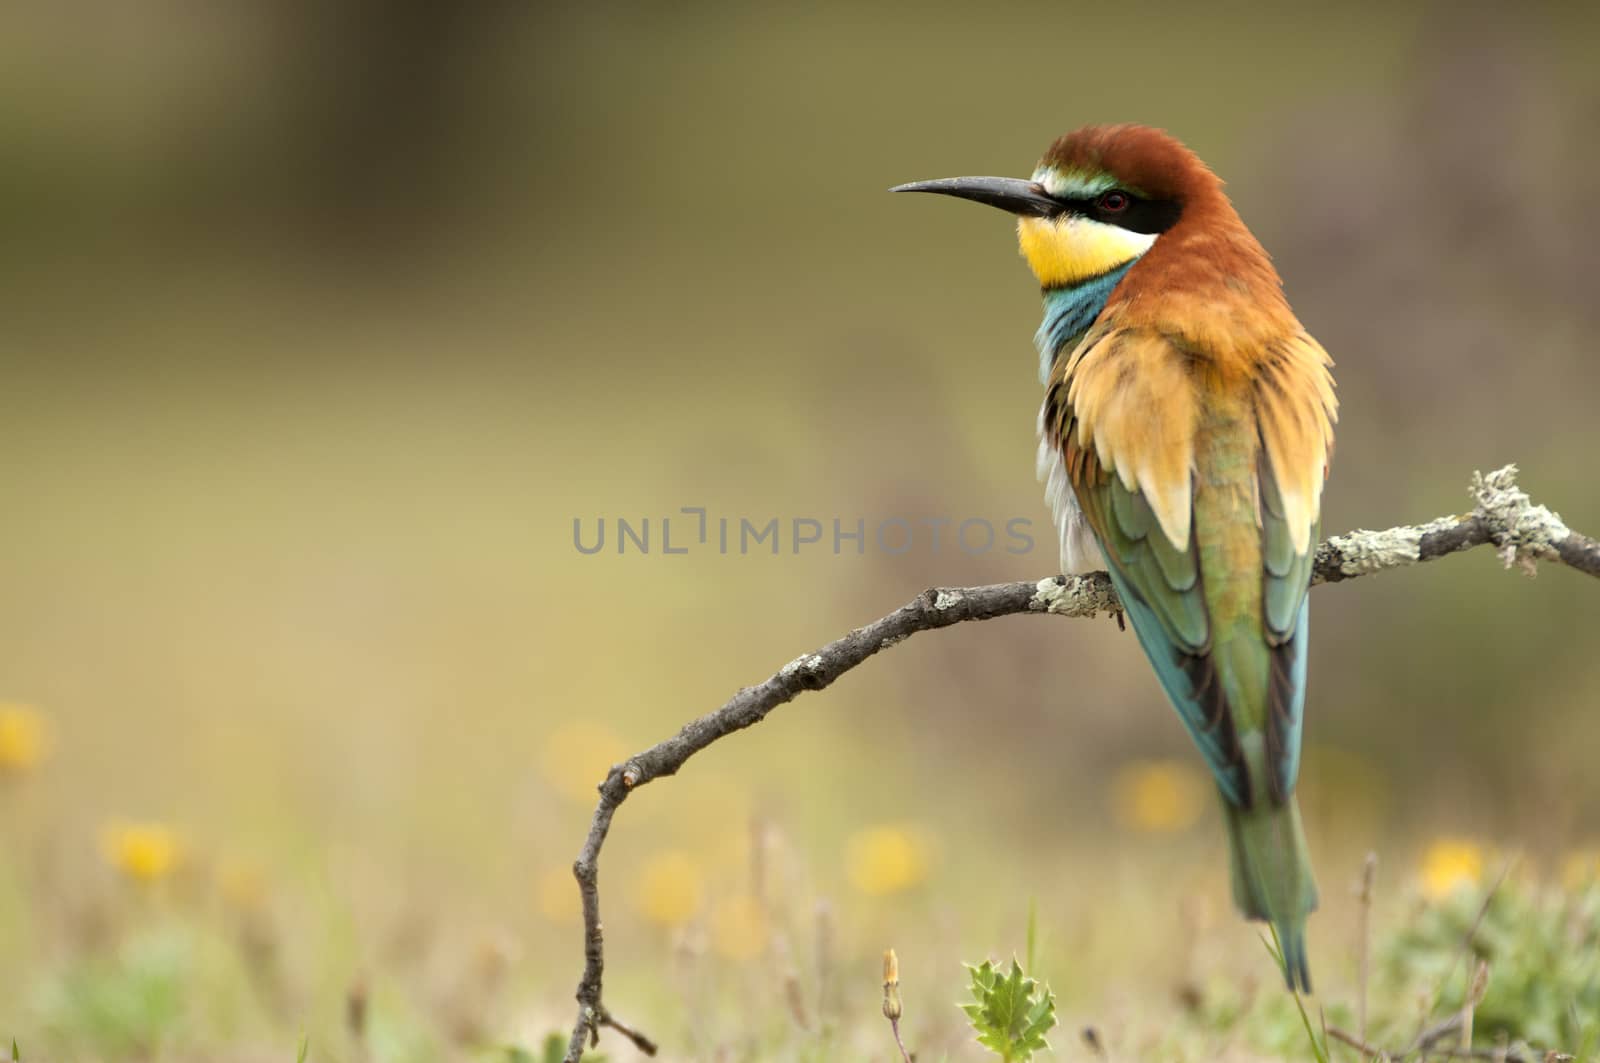 European bee-eater (Merops apiaster), Perched on a branch with a by jalonsohu@gmail.com